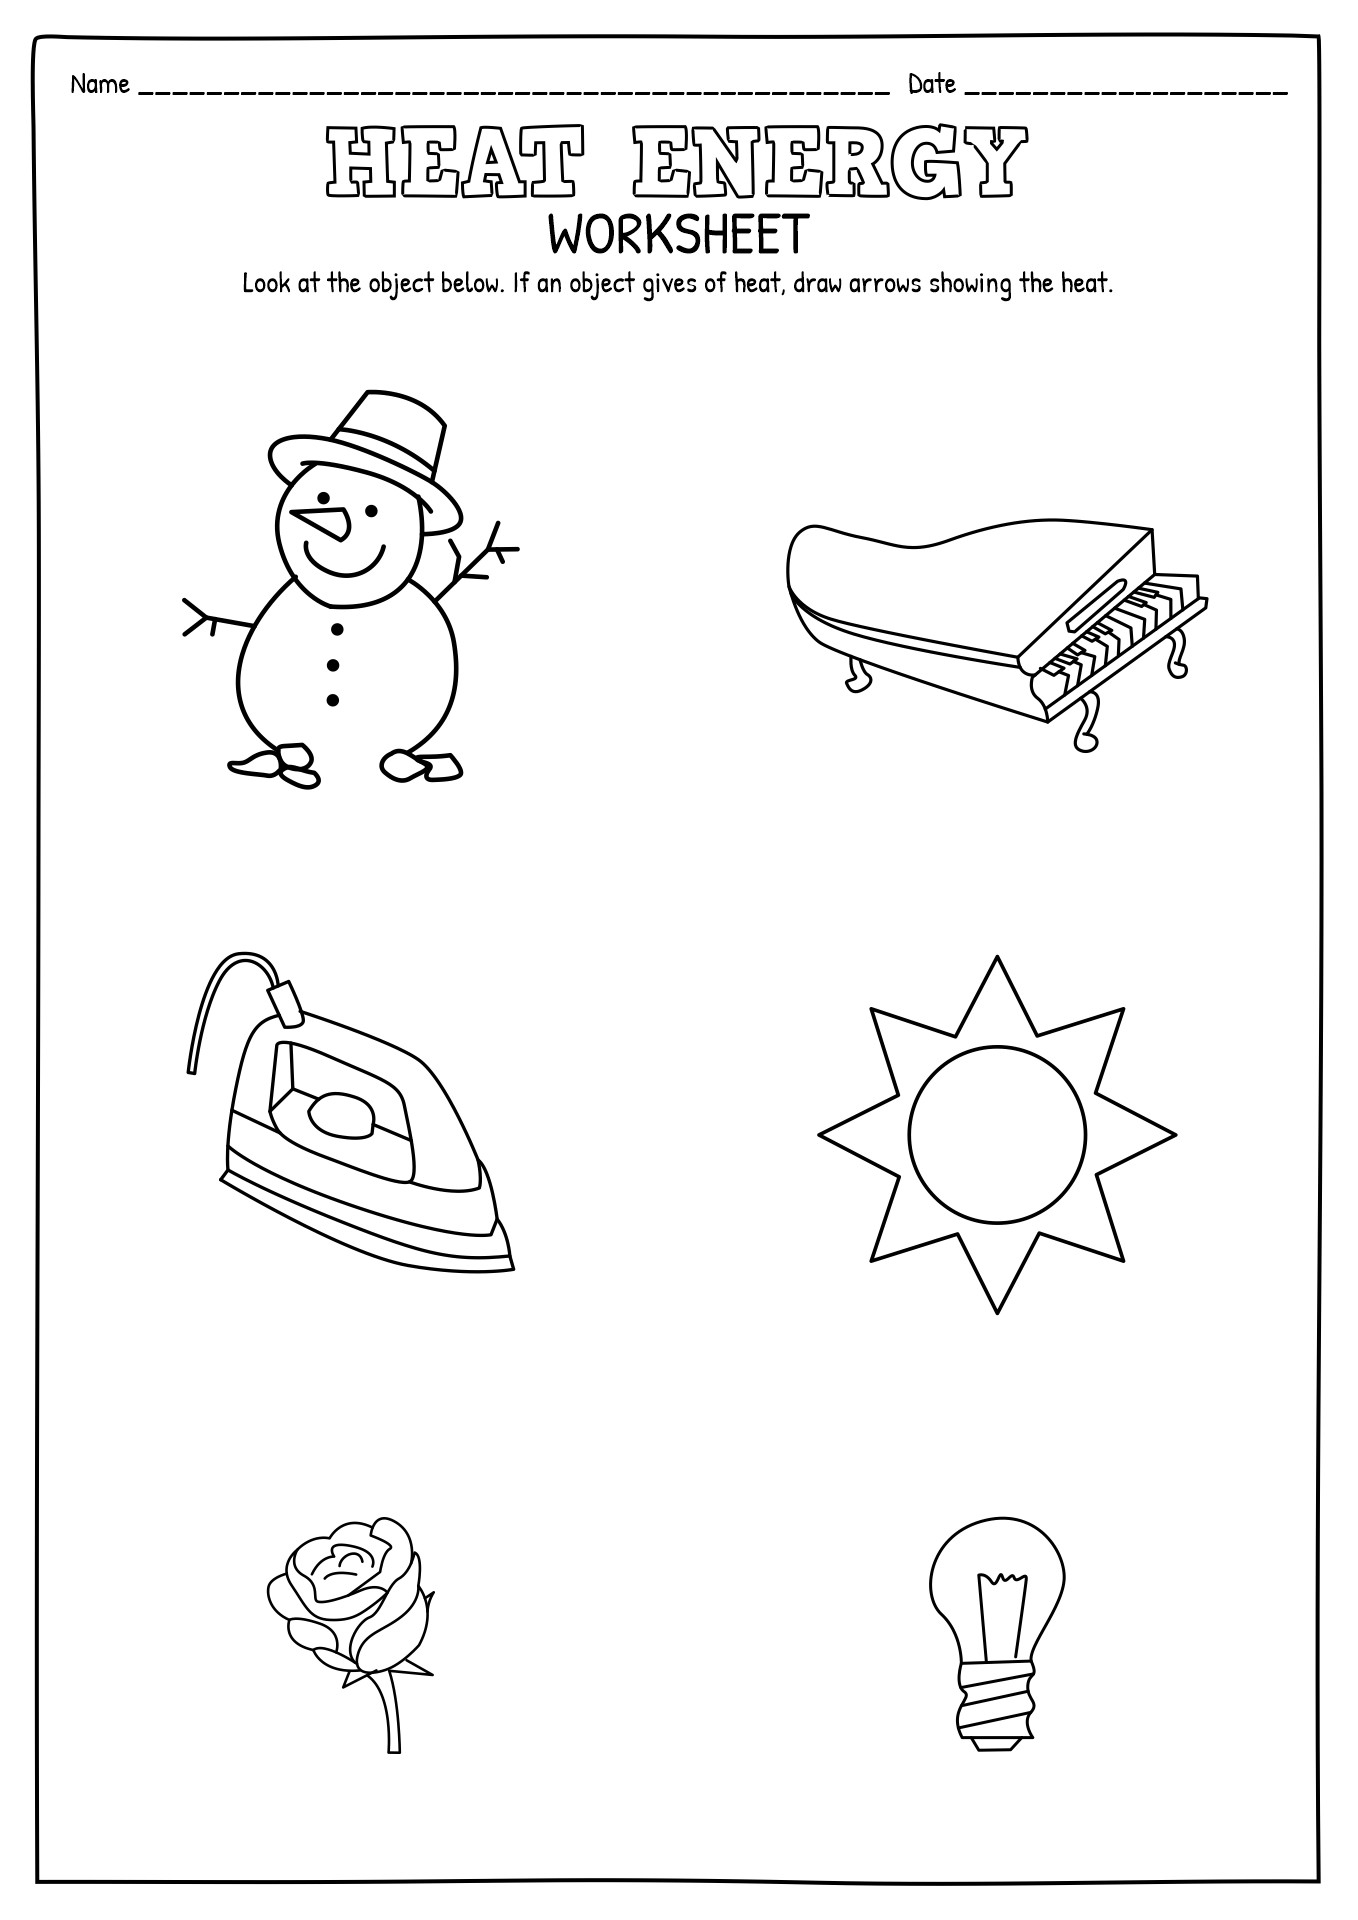 Light and Heat Energy Worksheets Image